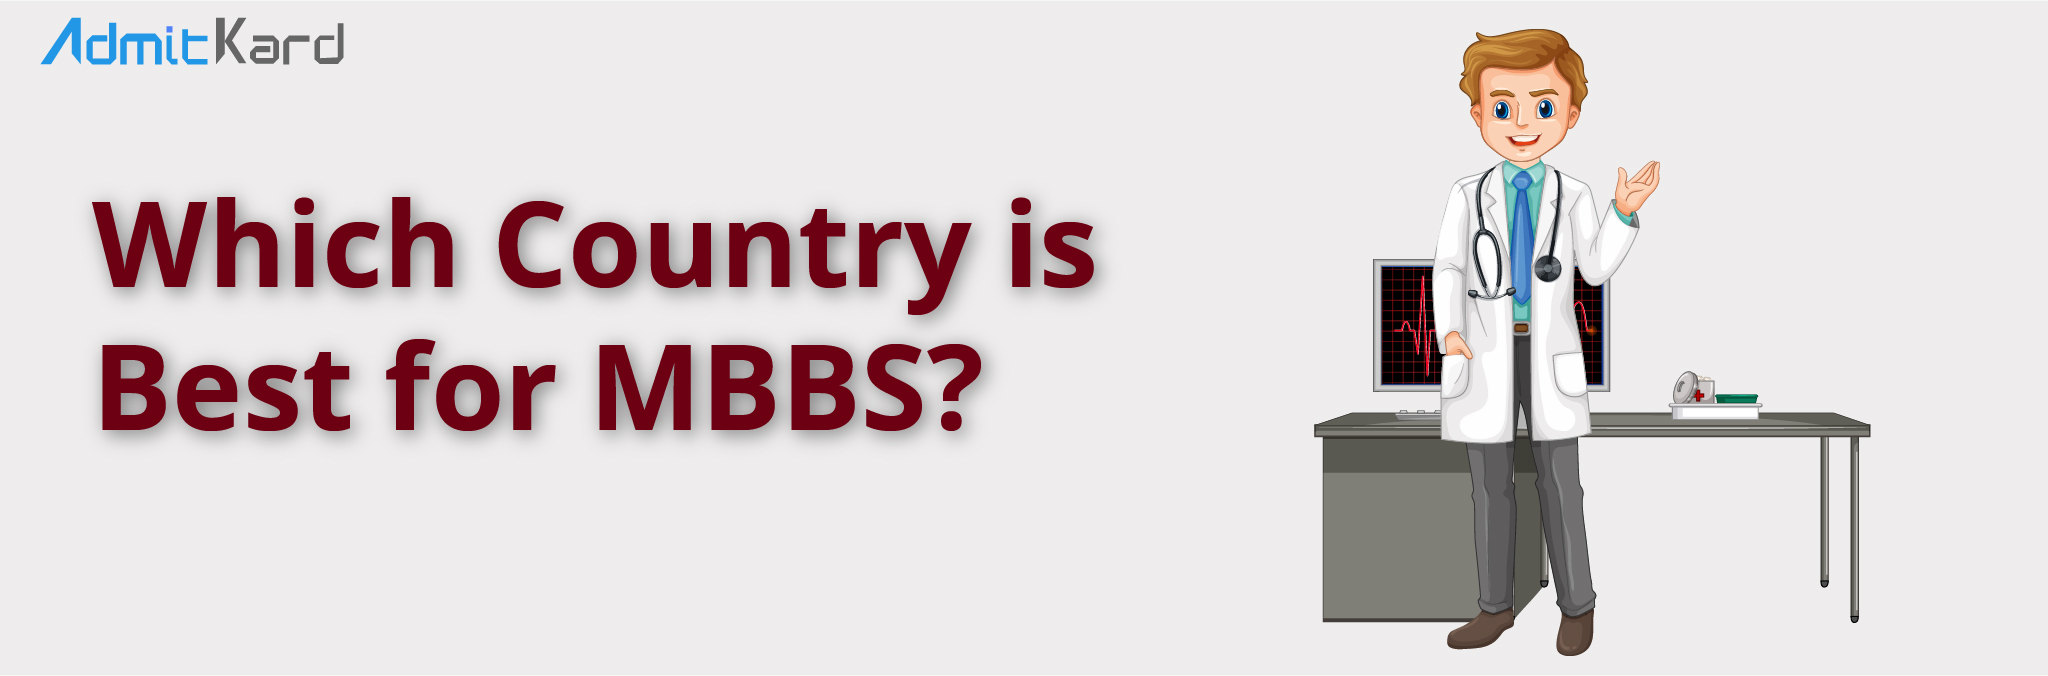 Which Country is Best for MBBS